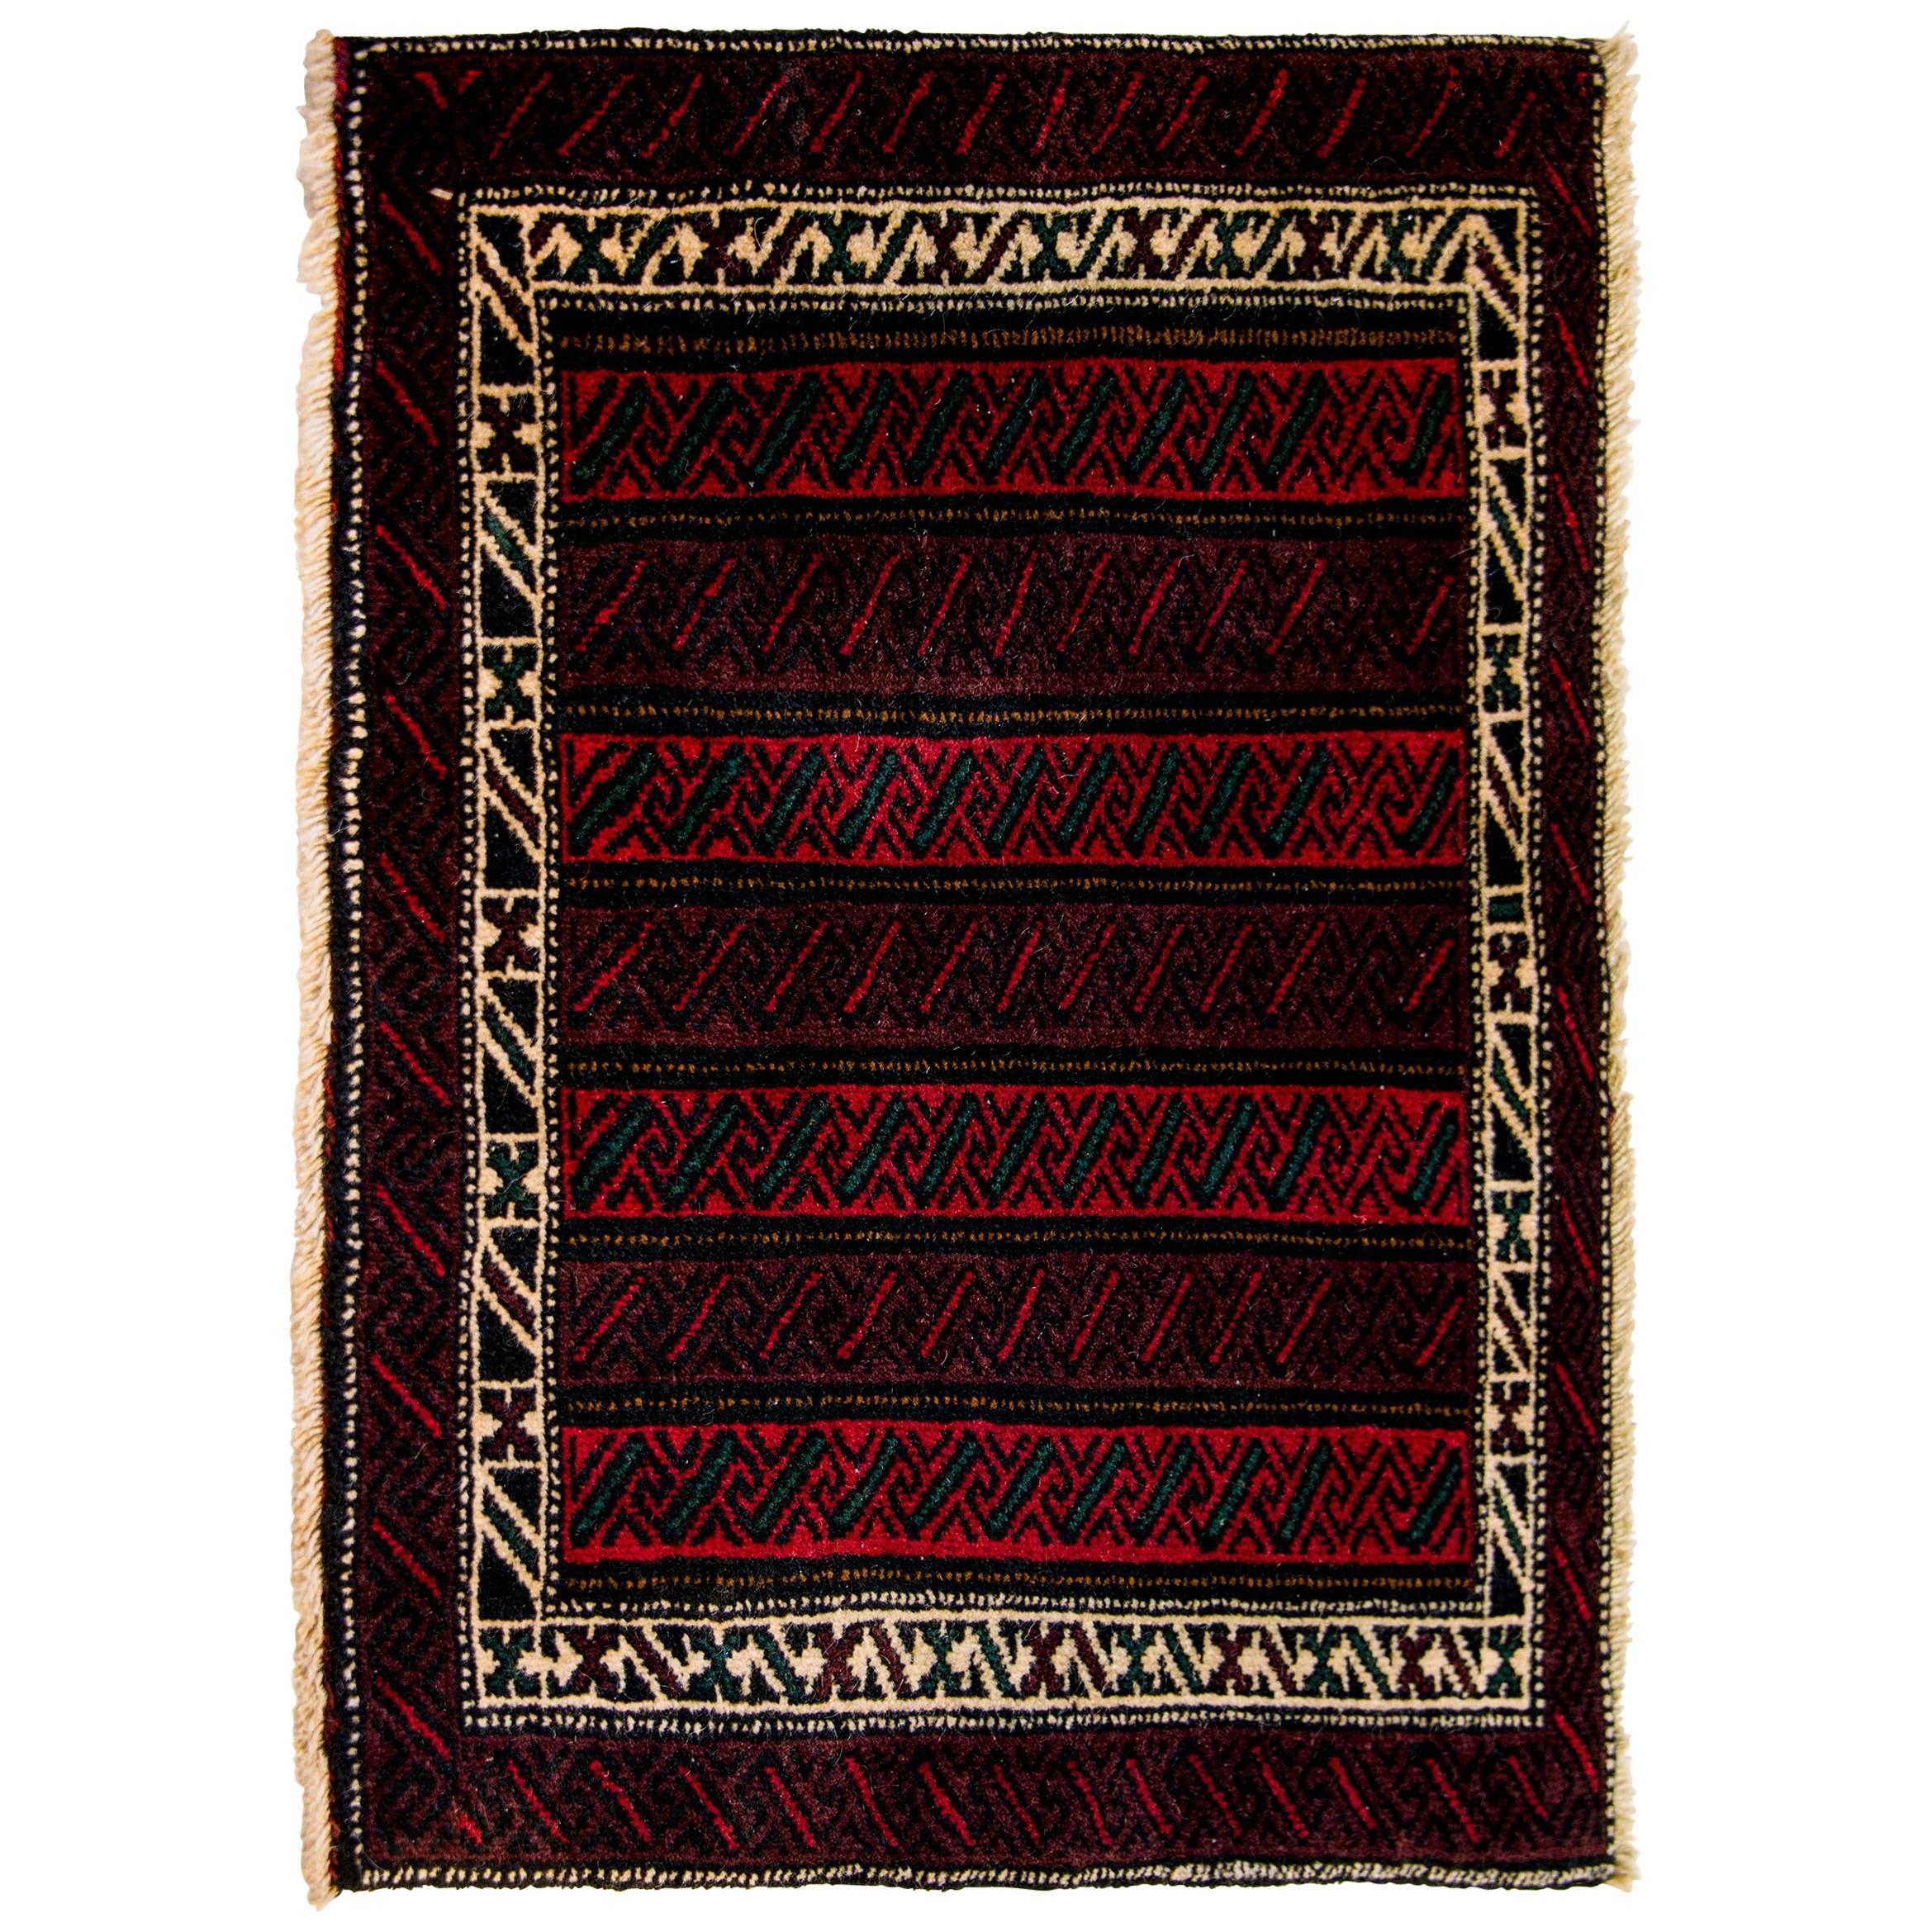 Early 20th Century Antique Baluch Rug